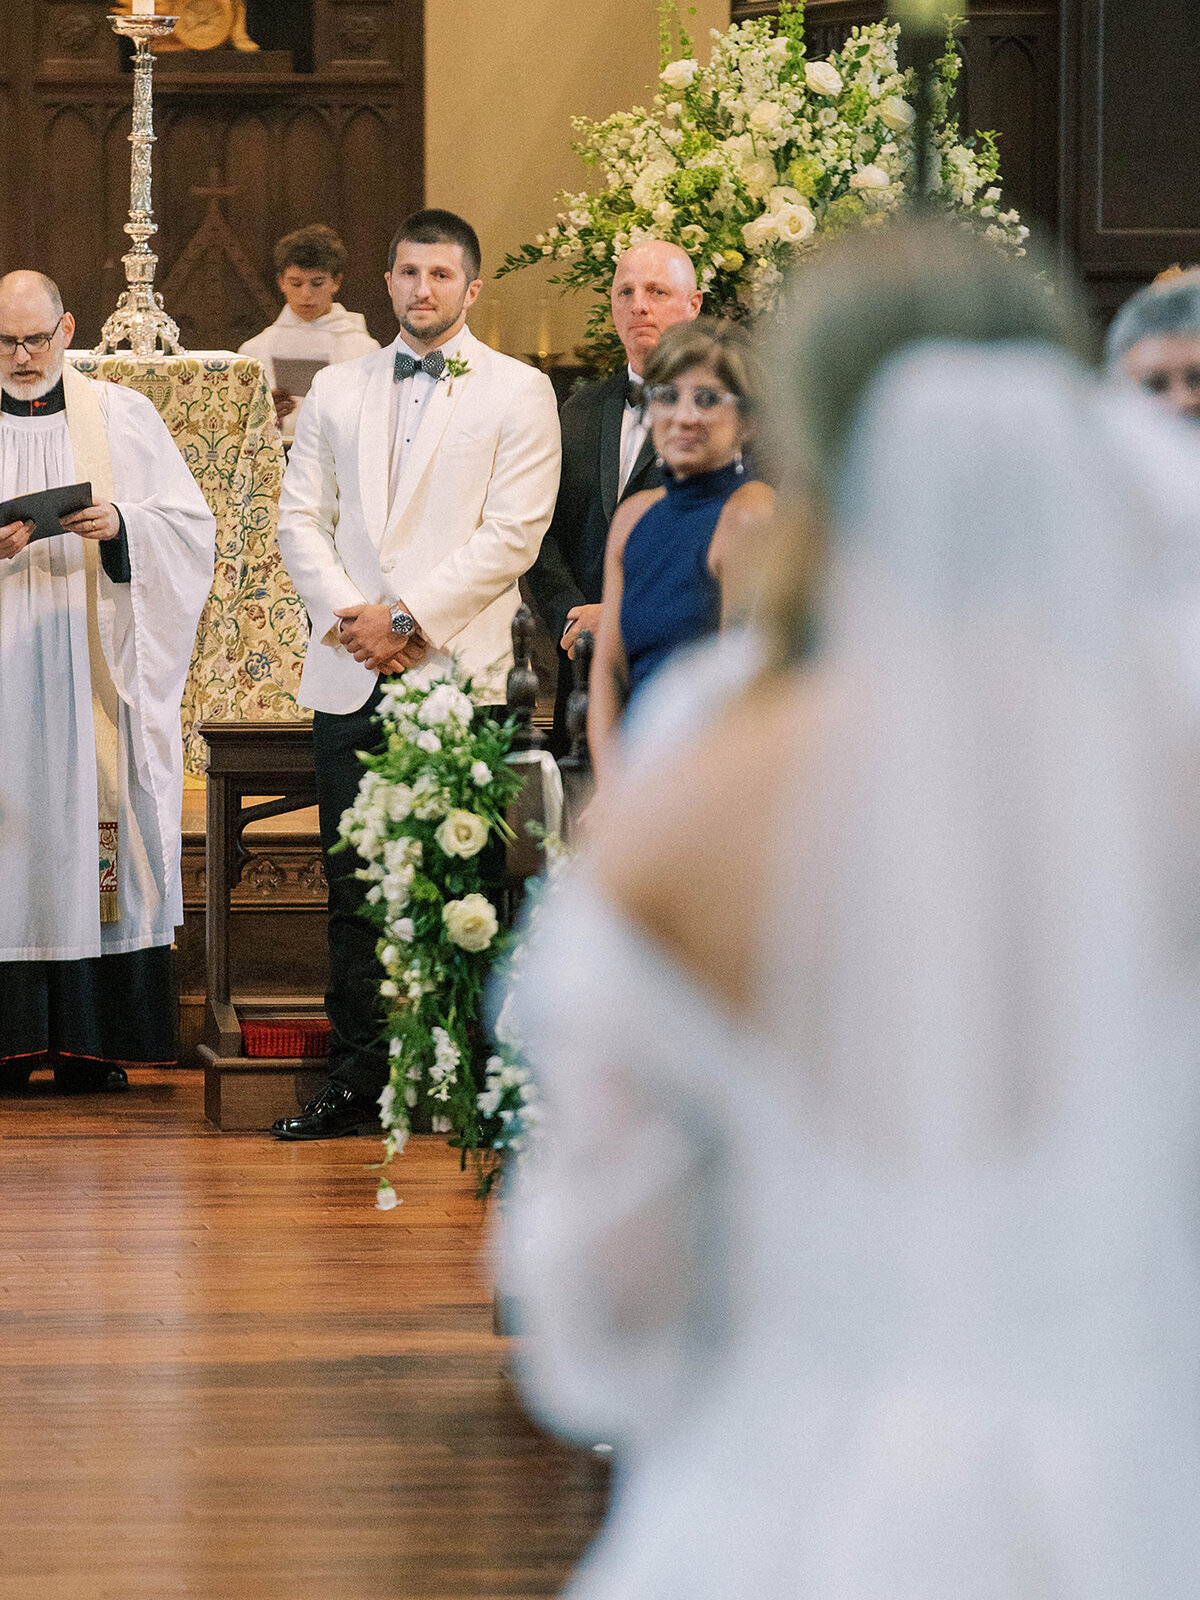 Bride walks down the aisle towards her groom in a church wedding ceremony